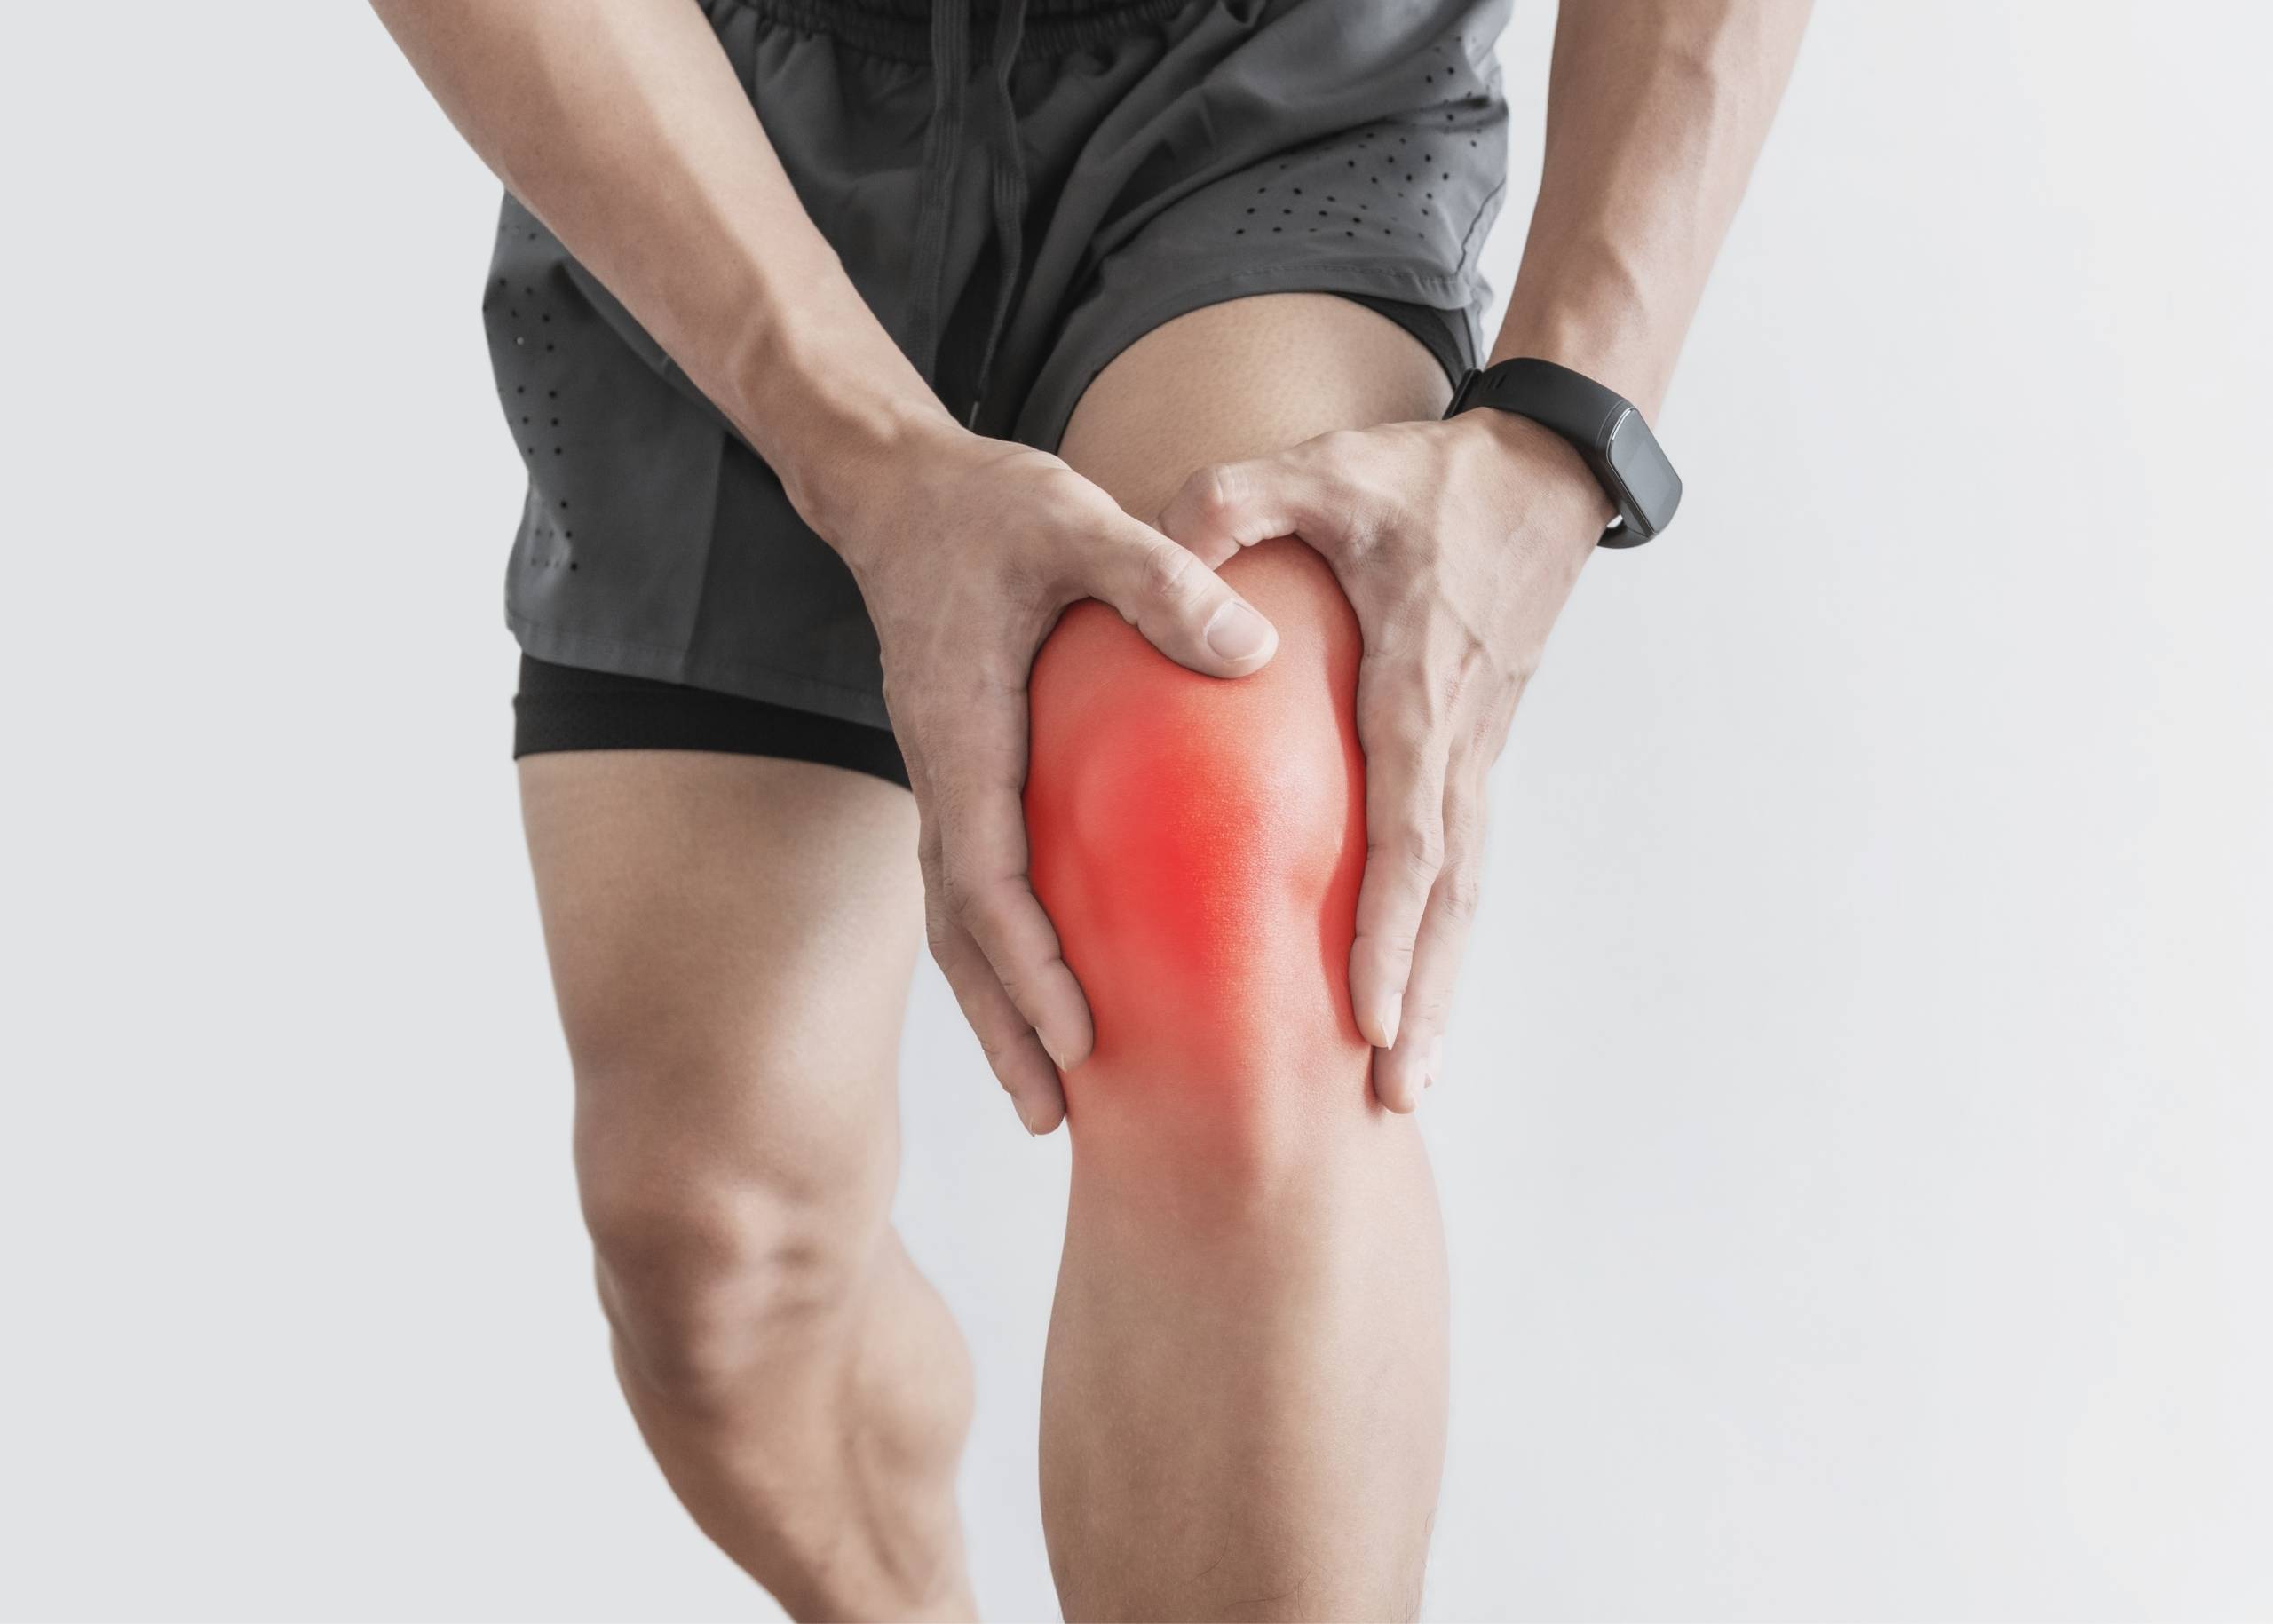 8 Effective Tips for Managing Knee Injury Pain